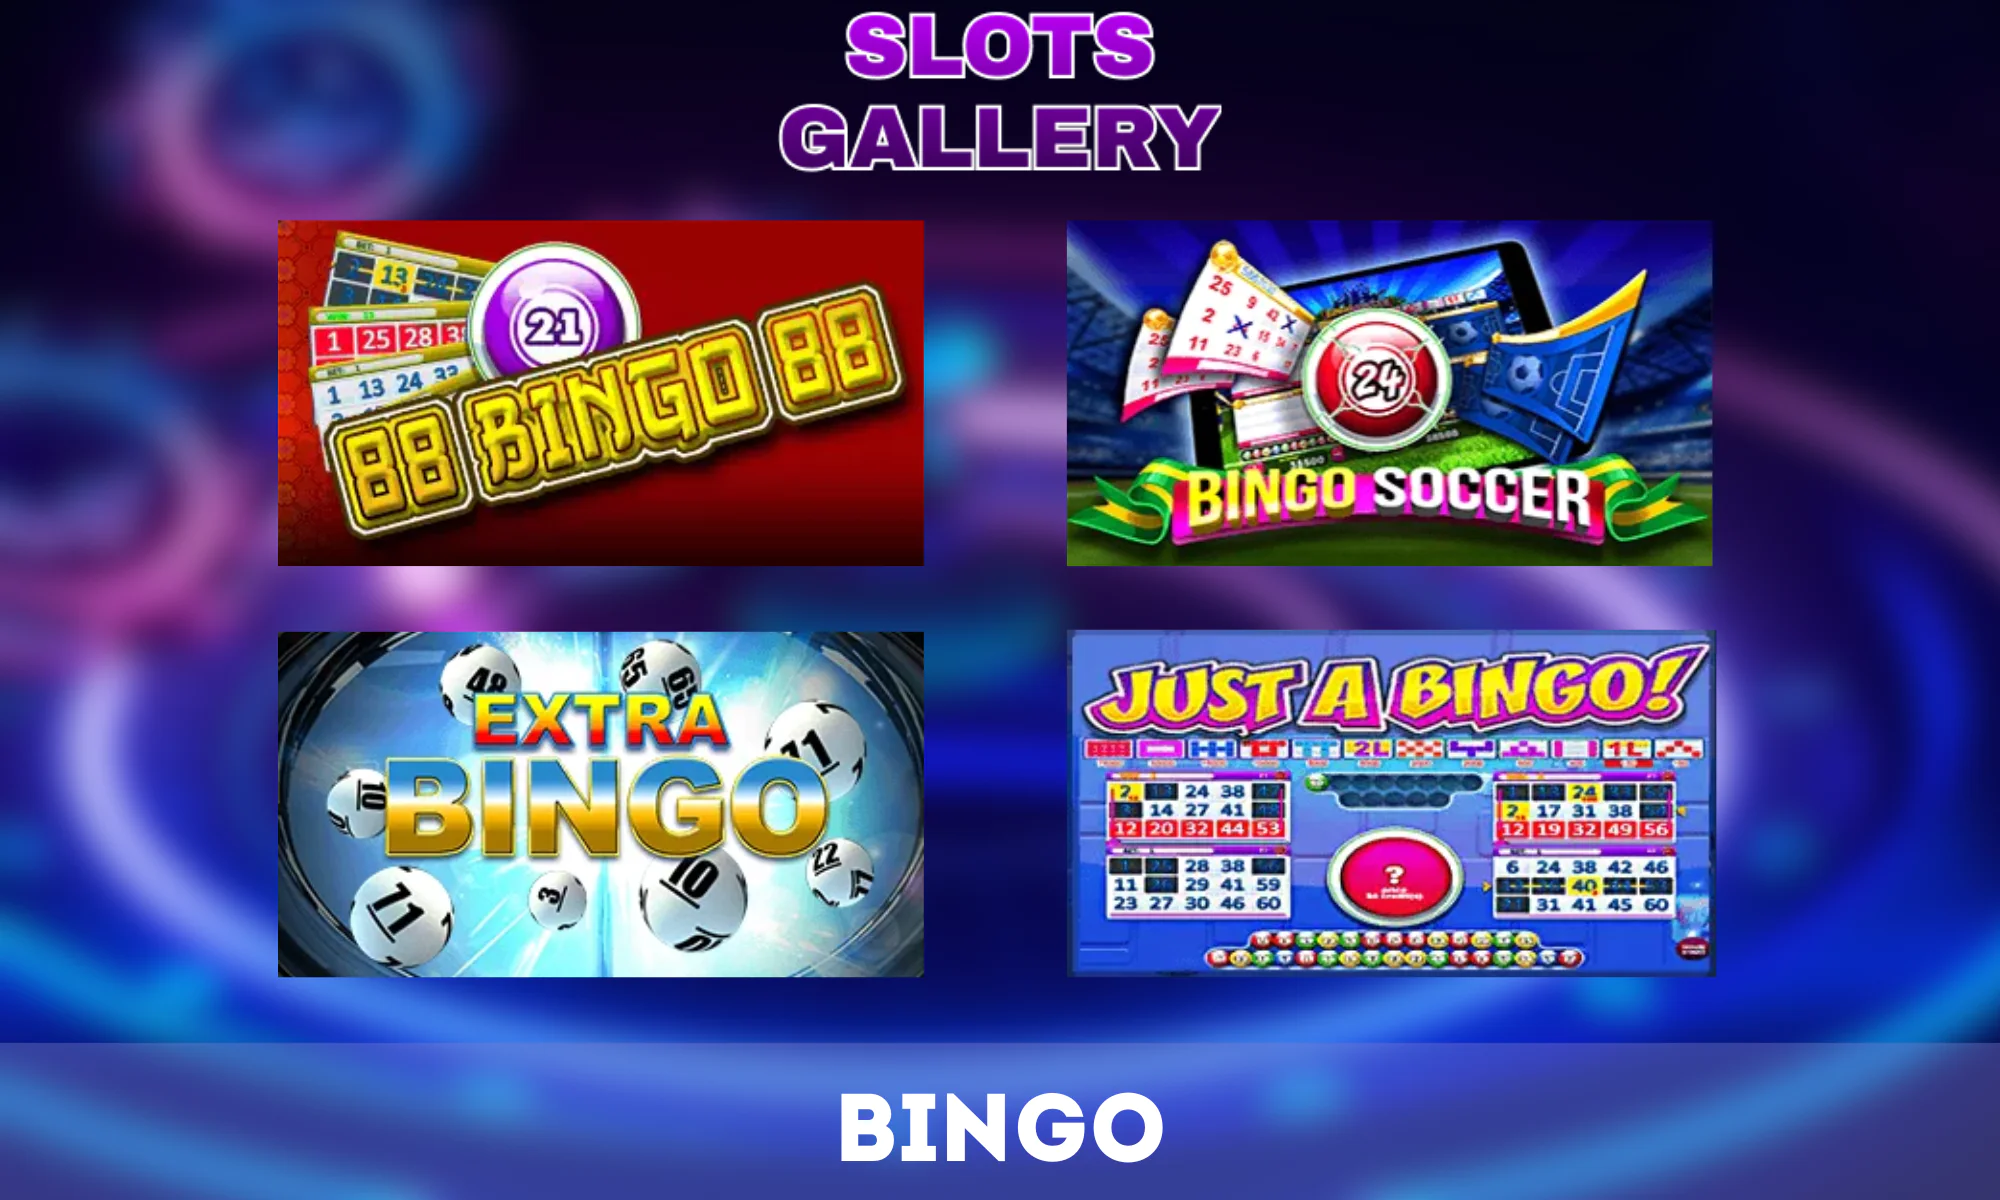 Available Bingo Games on the official website